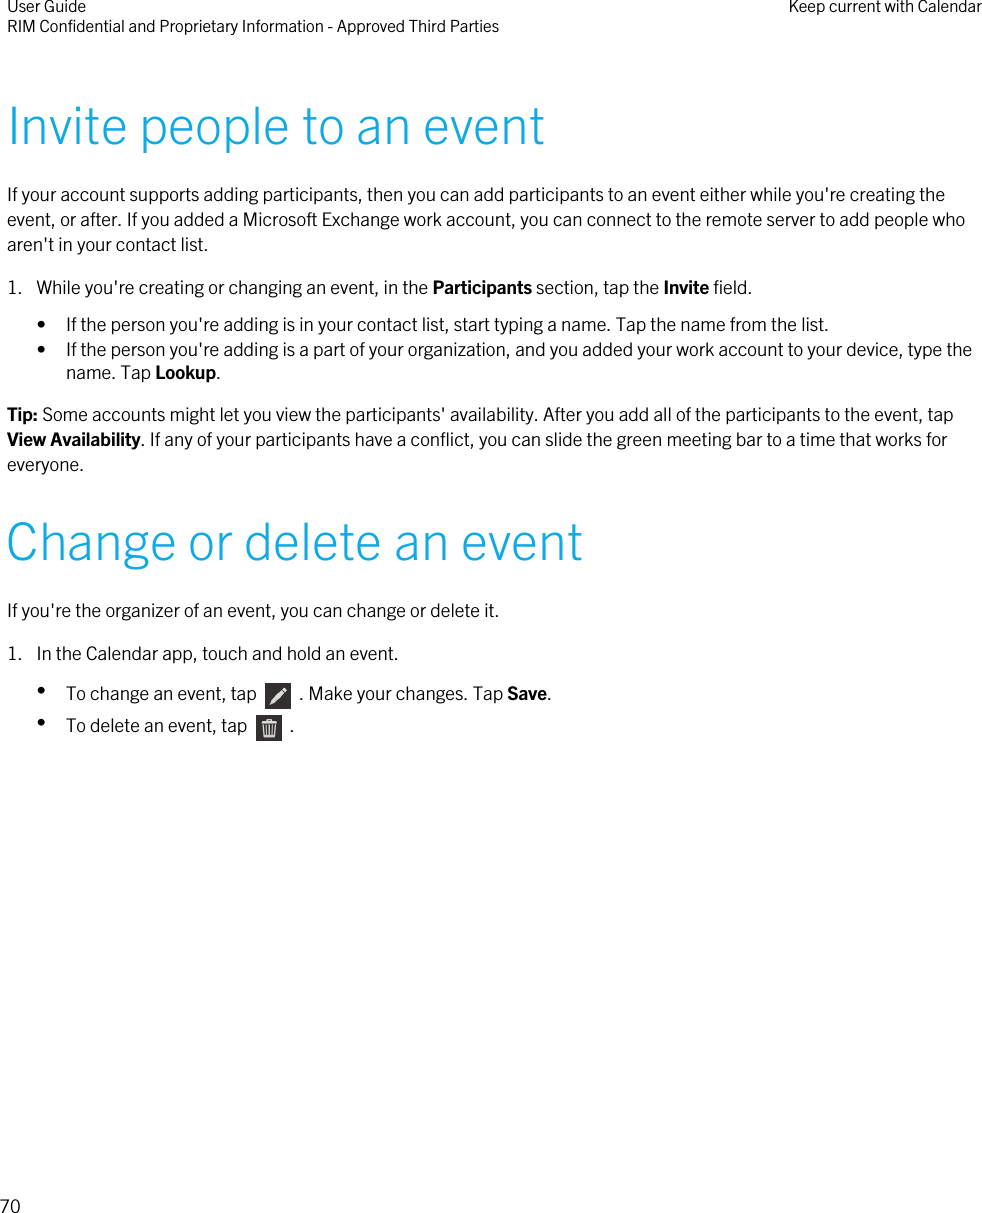 Invite people to an eventIf your account supports adding participants, then you can add participants to an event either while you&apos;re creating theevent, or after. If you added a Microsoft Exchange work account, you can connect to the remote server to add people whoaren&apos;t in your contact list.1. While you&apos;re creating or changing an event, in the Participants section, tap the Invite field.• If the person you&apos;re adding is in your contact list, start typing a name. Tap the name from the list.• If the person you&apos;re adding is a part of your organization, and you added your work account to your device, type thename. Tap Lookup.Tip: Some accounts might let you view the participants&apos; availability. After you add all of the participants to the event, tapView Availability. If any of your participants have a conflict, you can slide the green meeting bar to a time that works foreveryone.Change or delete an eventIf you&apos;re the organizer of an event, you can change or delete it.1. In the Calendar app, touch and hold an event.•To change an event, tap    . Make your changes. Tap Save.•To delete an event, tap    .User GuideRIM Confidential and Proprietary Information - Approved Third Parties Keep current with Calendar70